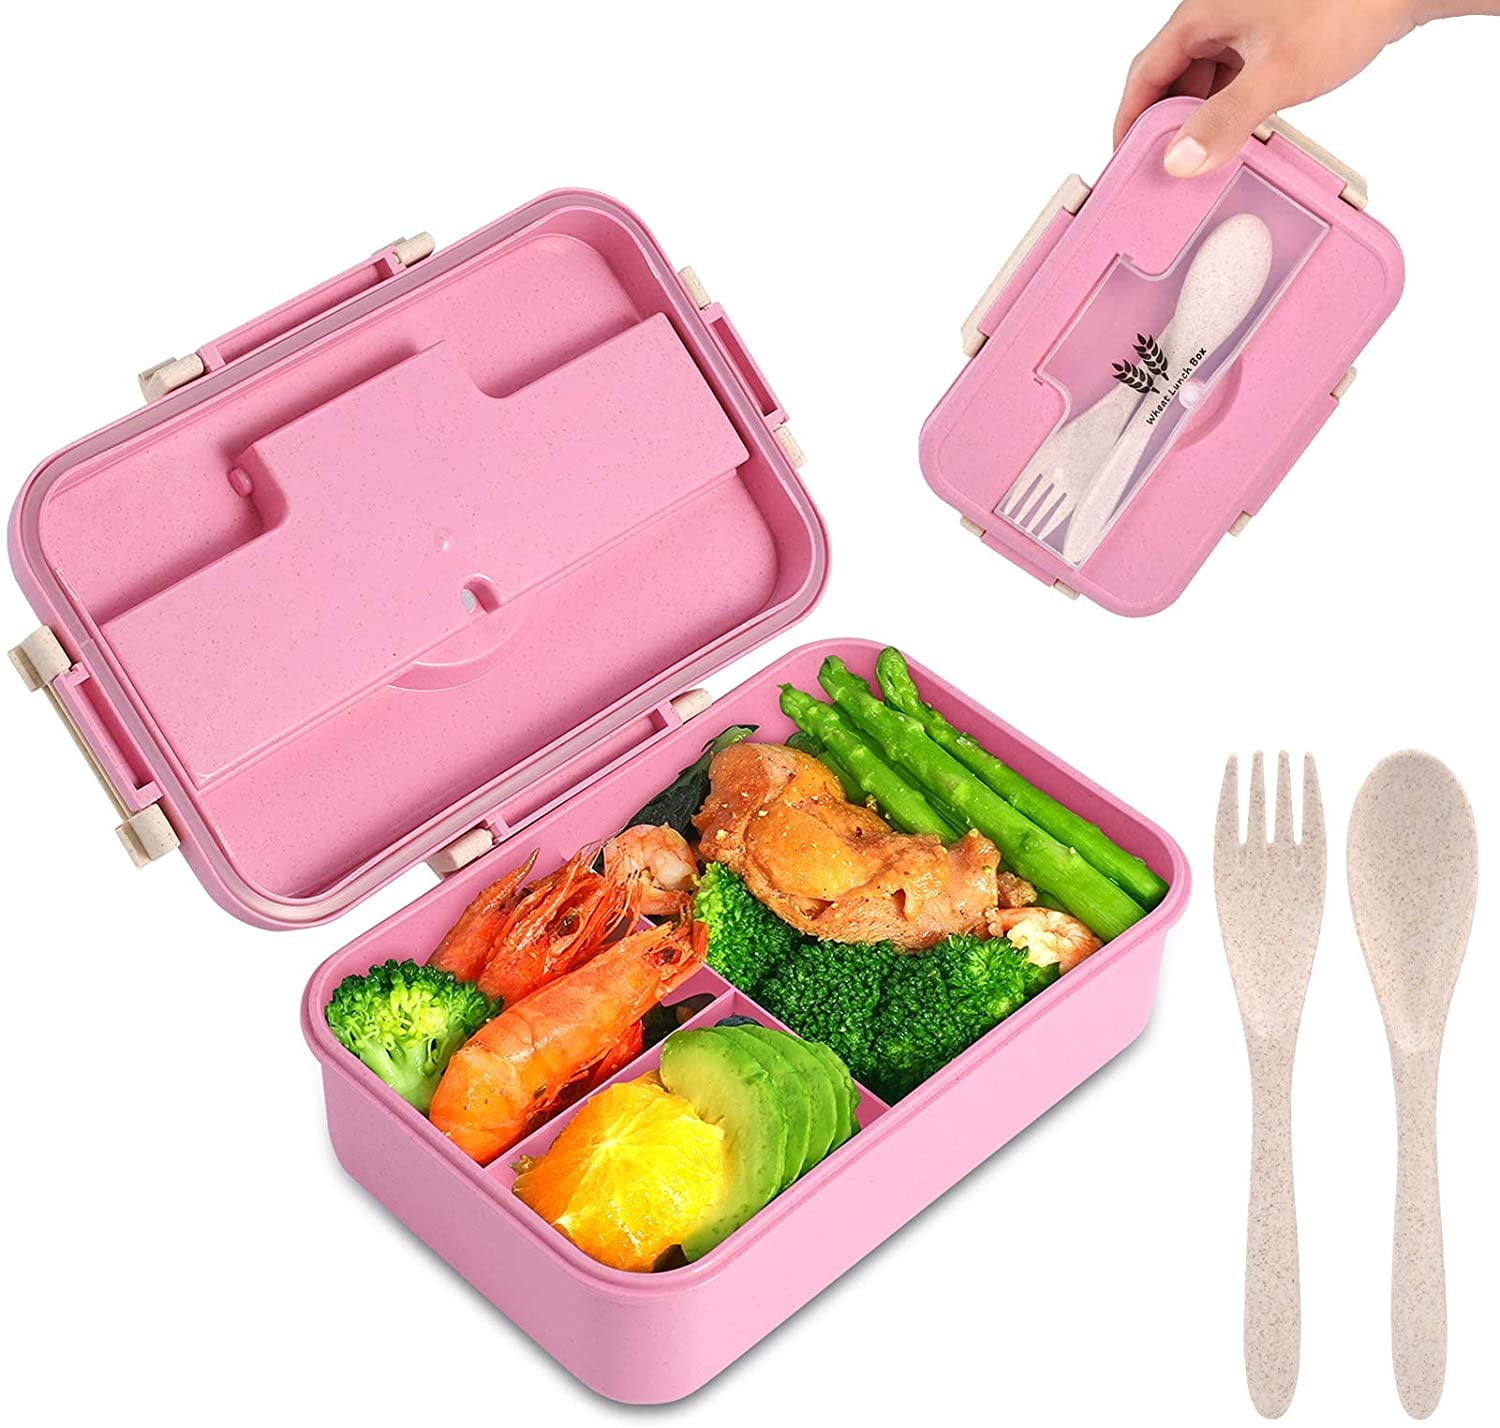 Green Microwave Safe 1200ML Salad Container Lunch Container Bento Box to Go for Lunch,Removable Tray,Lunch Box with Cutlery,1 Fork and 1 Spoon,Clear,Leak-Proof 